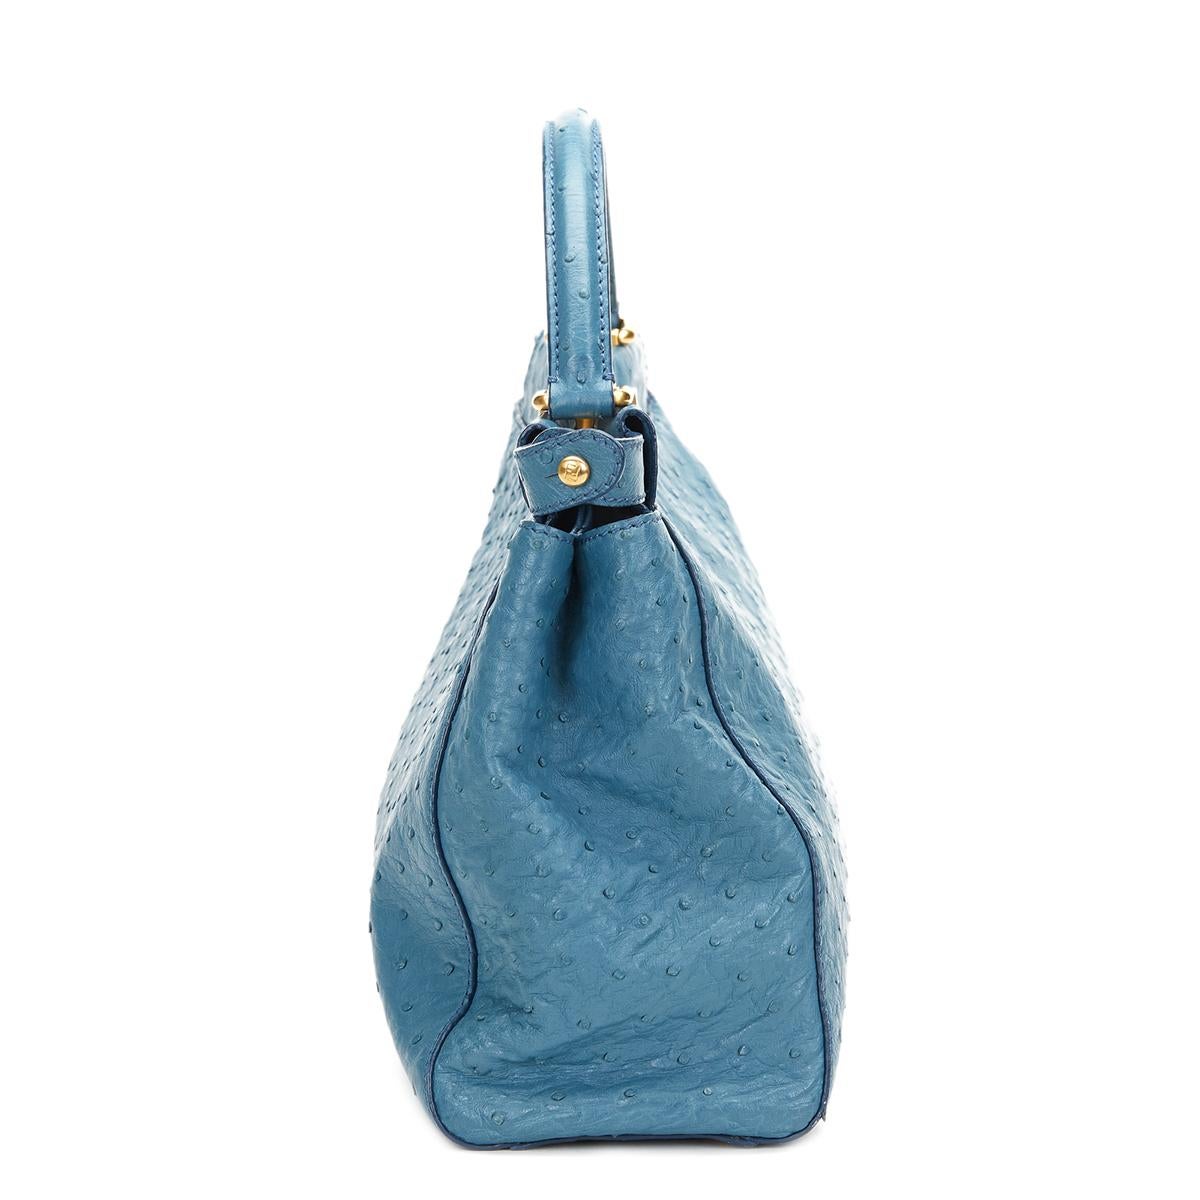 FENDI
Blue Ostrich Leather Small Peekaboo

Reference: HB439
Serial Number: 8BN226-A9P129-010
Age (Circa): 2000
Accompanied By: Shoulder Strap
Authenticity Details: Serial Tags (Made in Italy)
Gender: Ladies
Type: Top Handle, Shoulder,